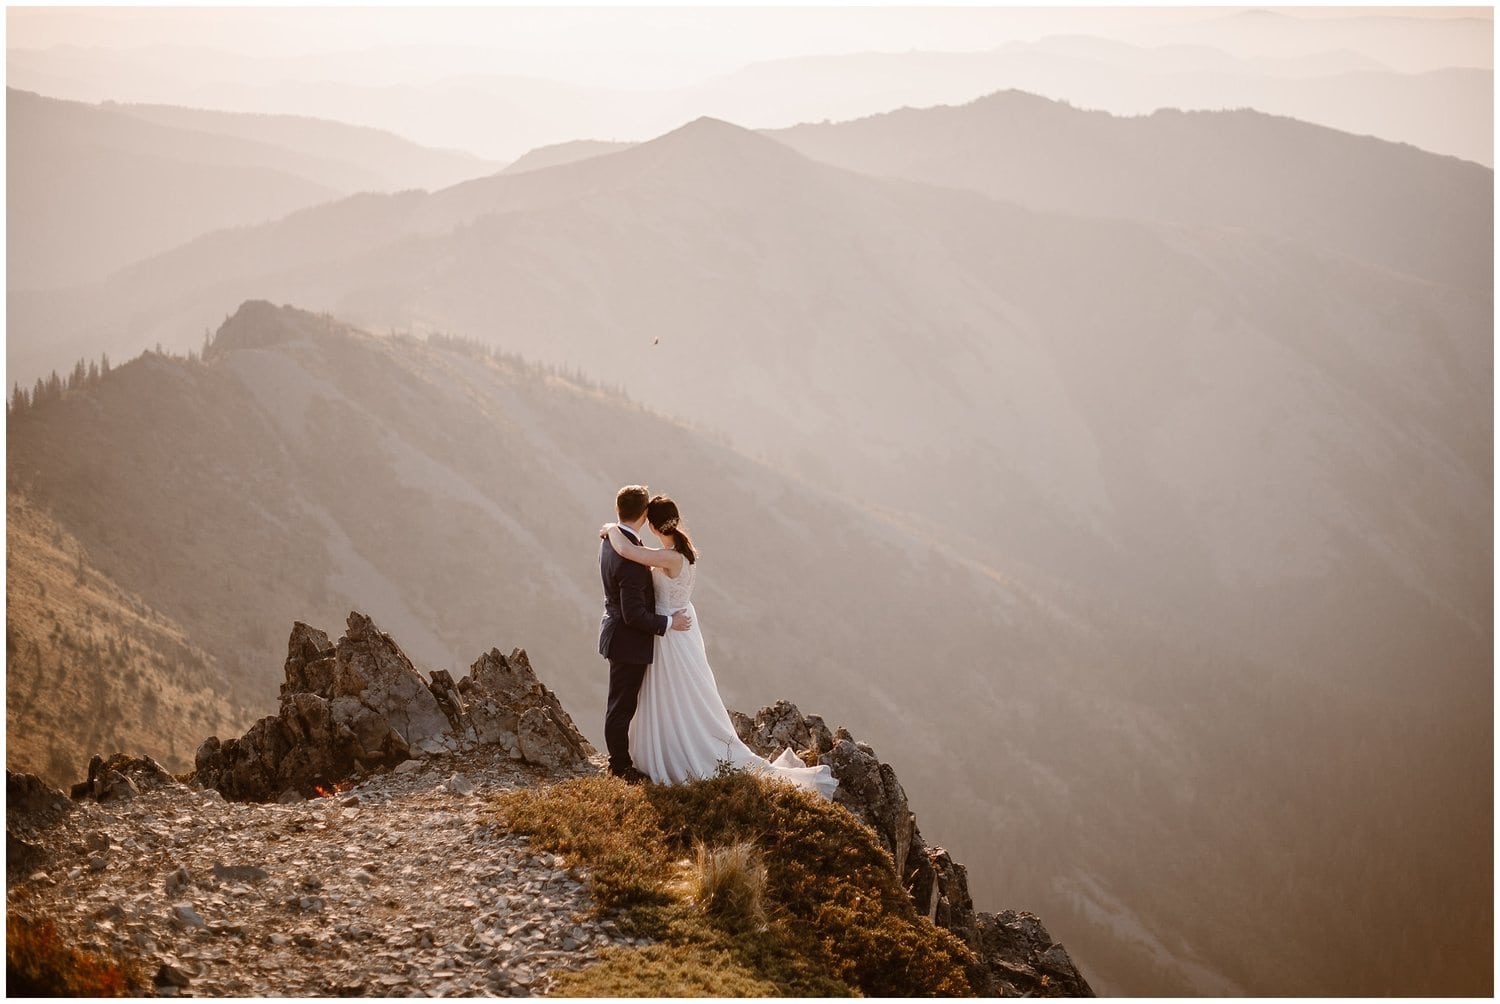 Bride and groom embrace on mountain cliff while looking out at the mountains, during sunrise in Washington. 